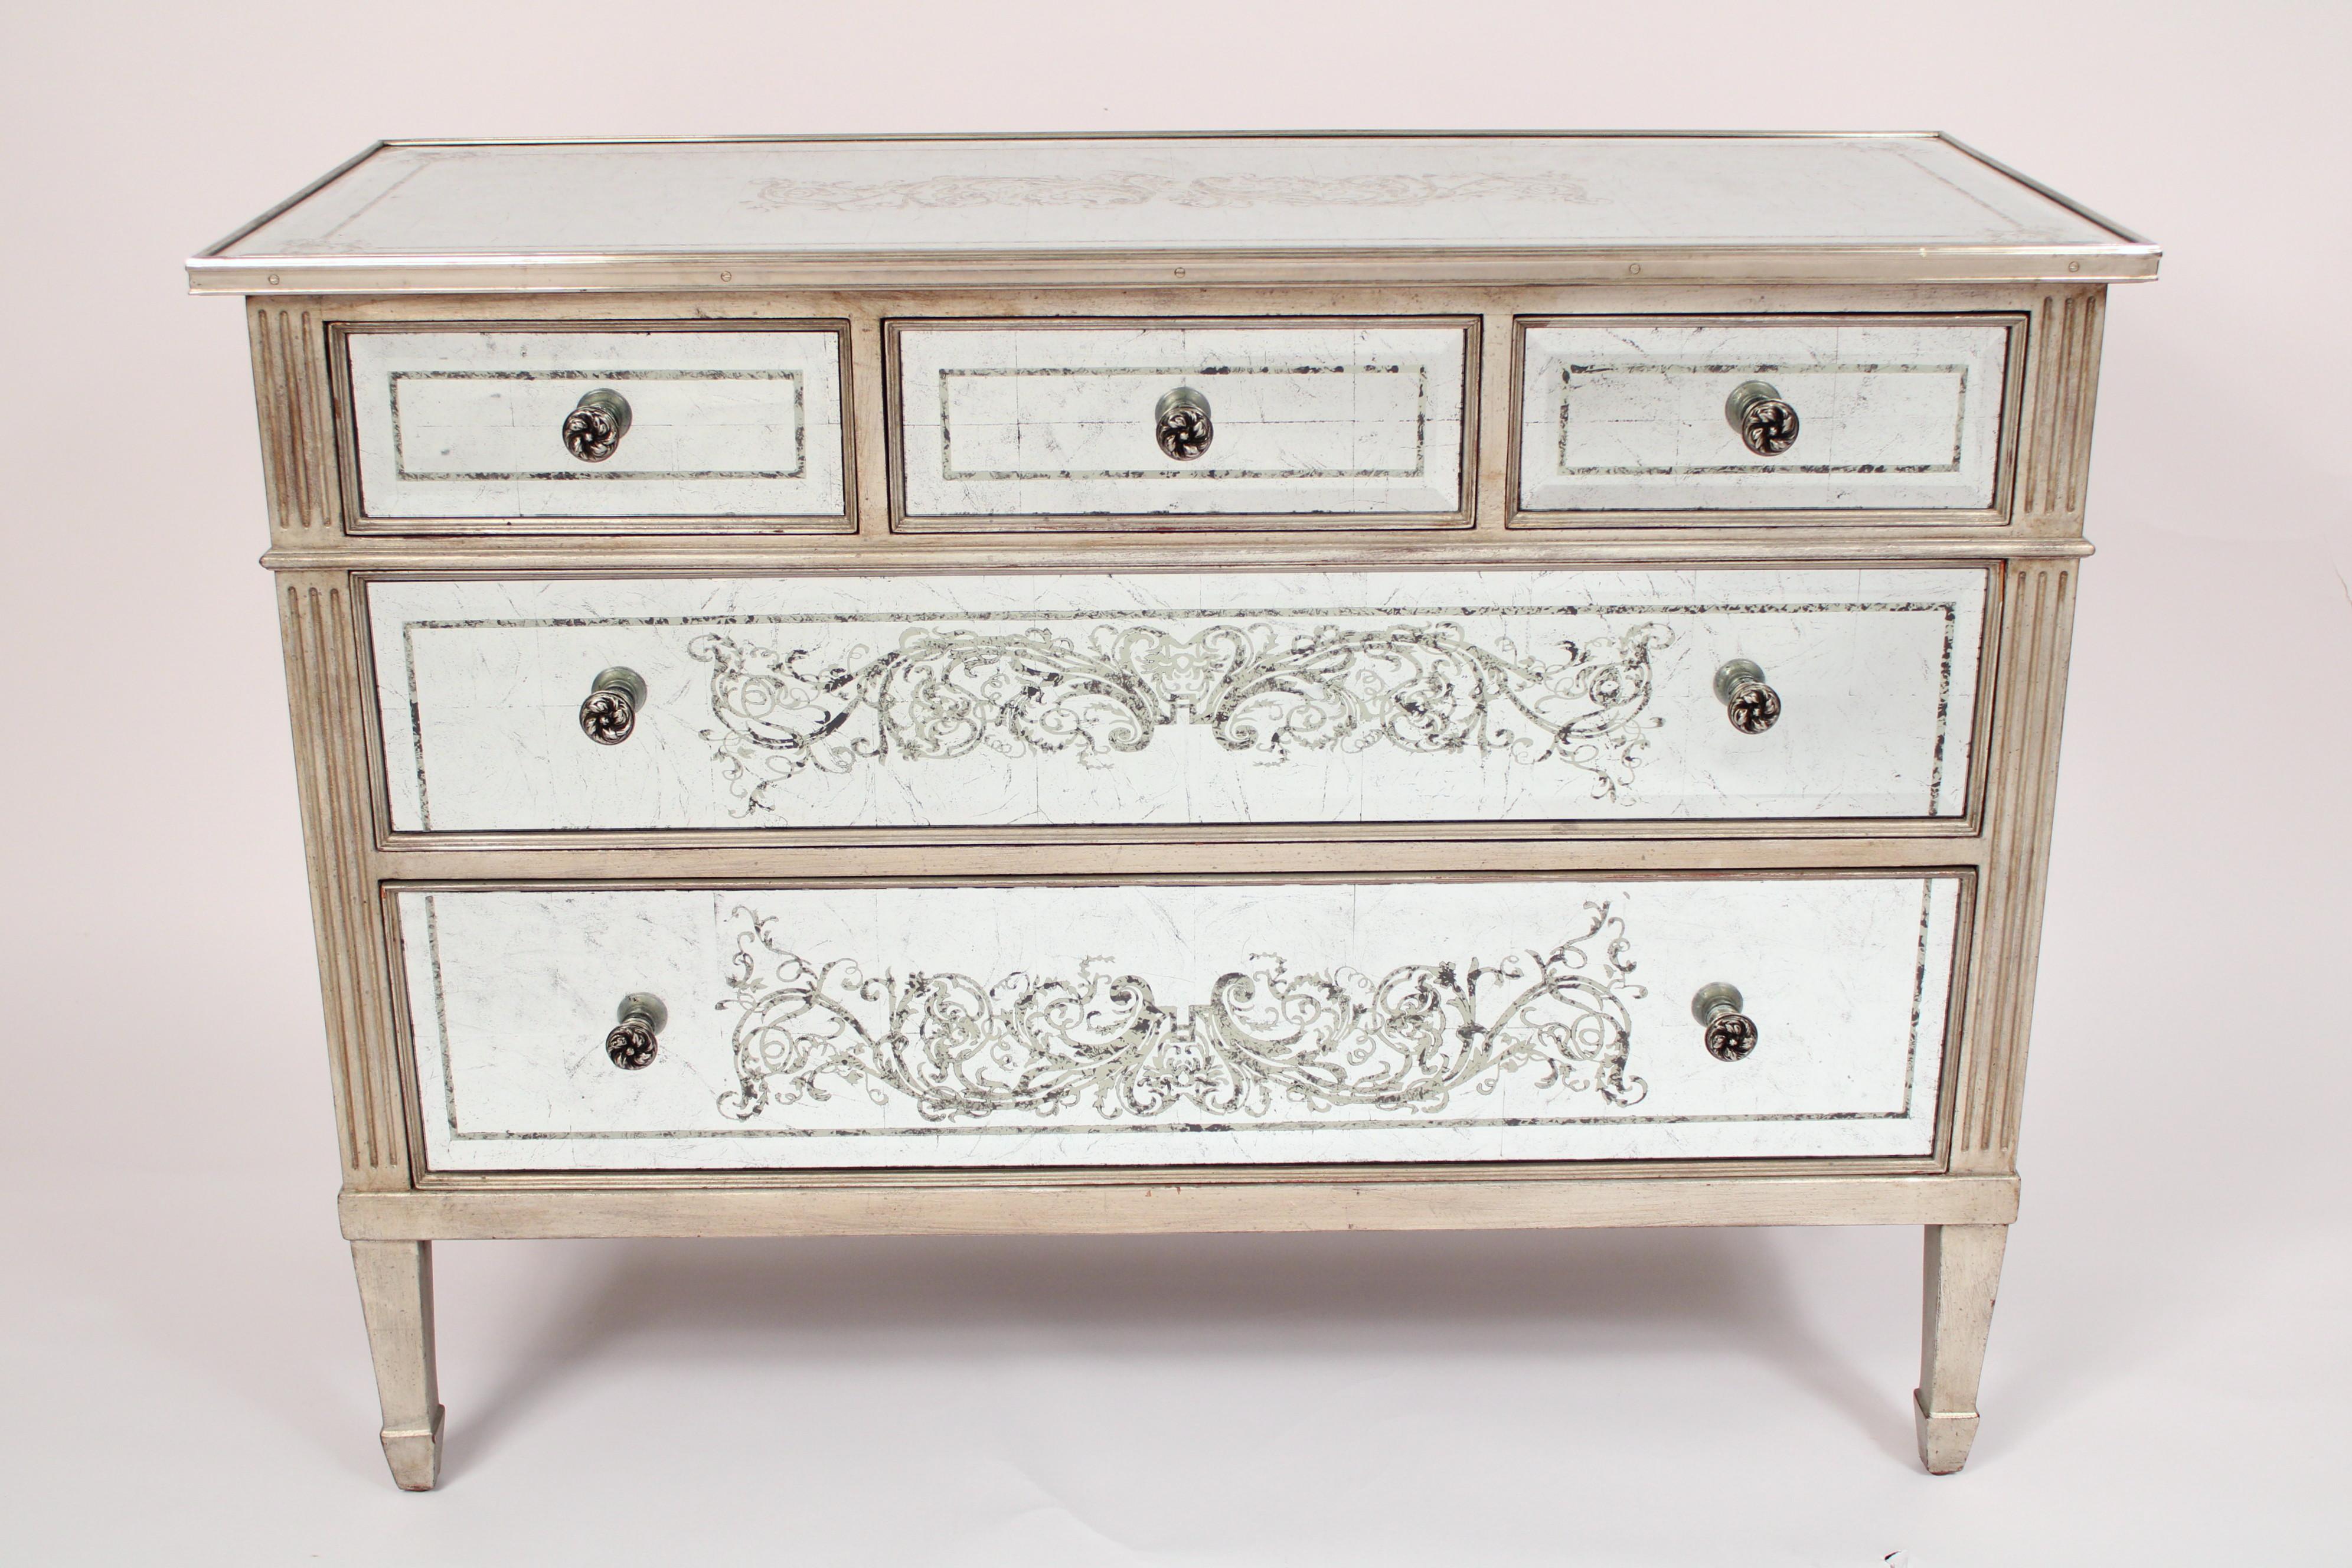 Louis XVI style glass clad chest of drawers, circa 1980's. With a rectangular over hanging top with metal moldings on front, side and back edges, three top drawers and two lower drawers, flanked by fluted columns, the chest resting on square tapered